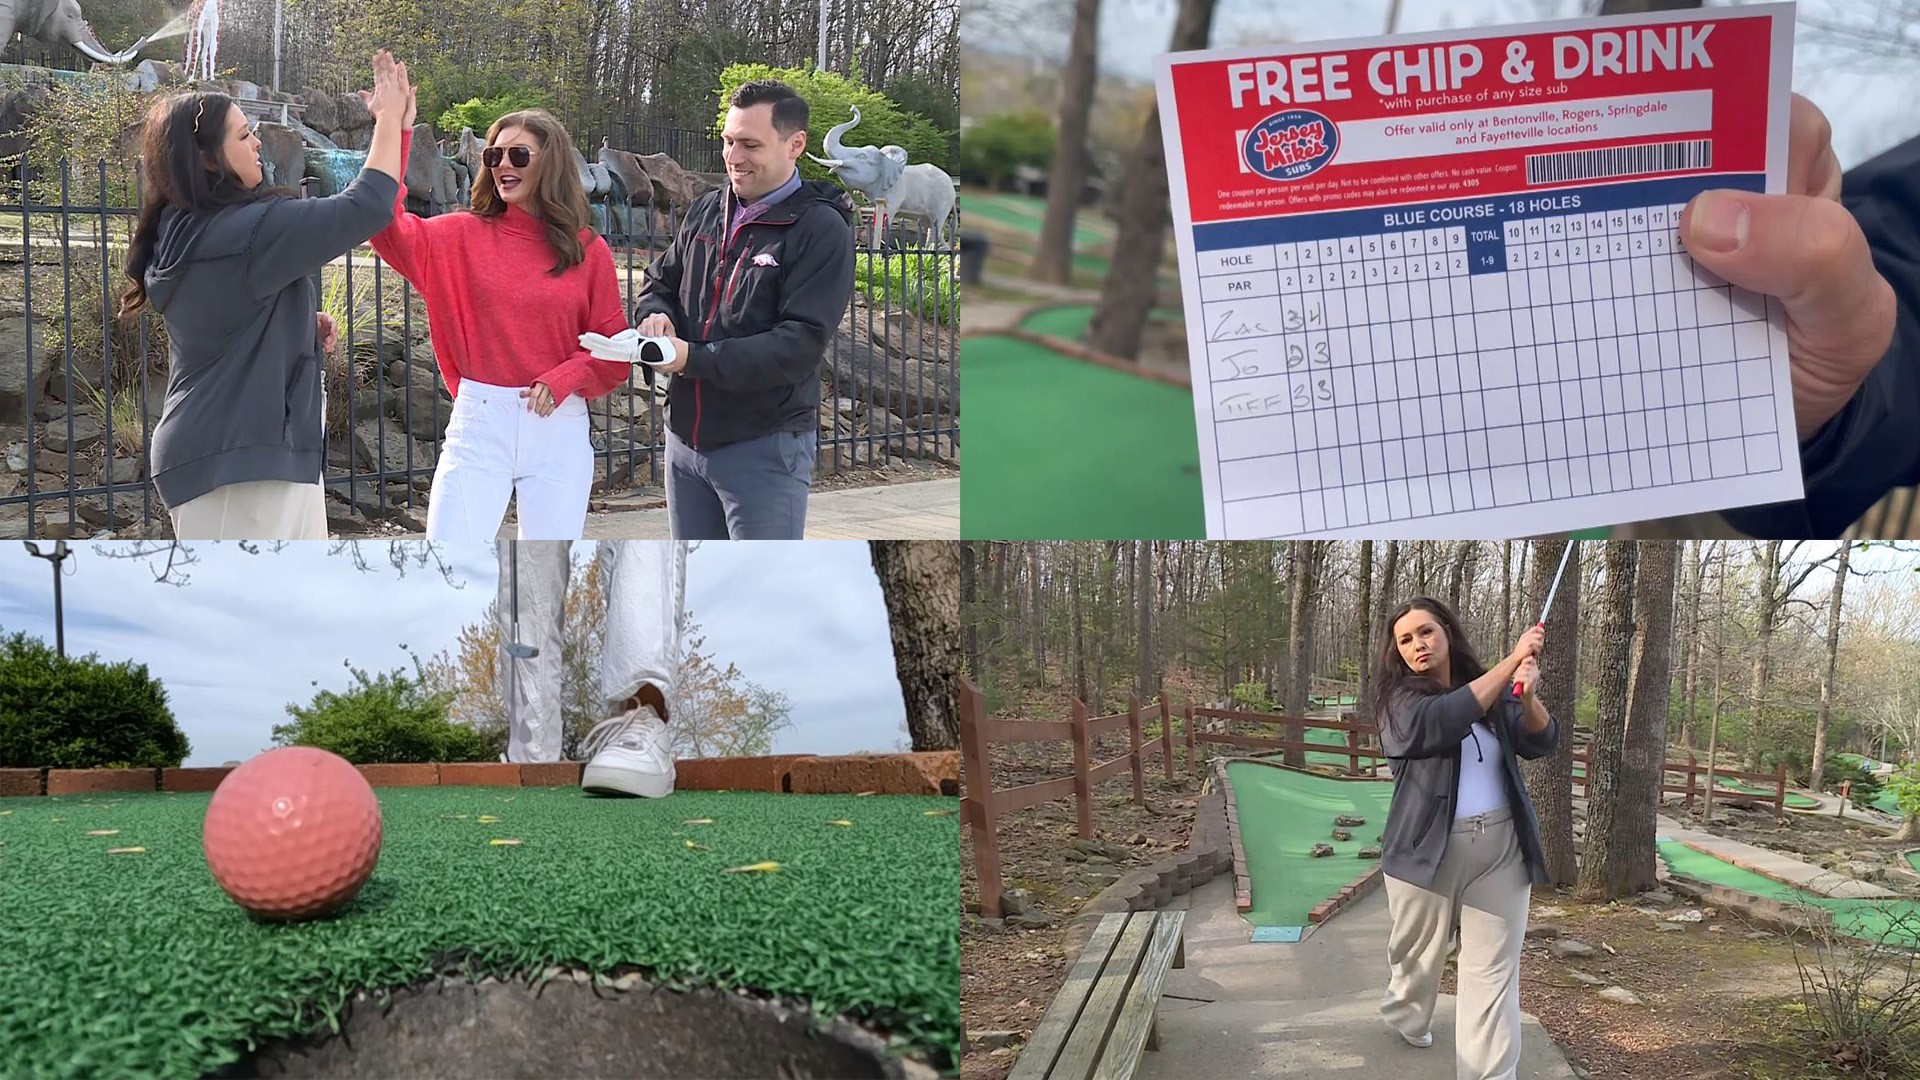 On this episode of Around the Corner, the 5NEWS morning crew had their own putt-putt tournament at Northwest Arkansas' oldest mini golf course.